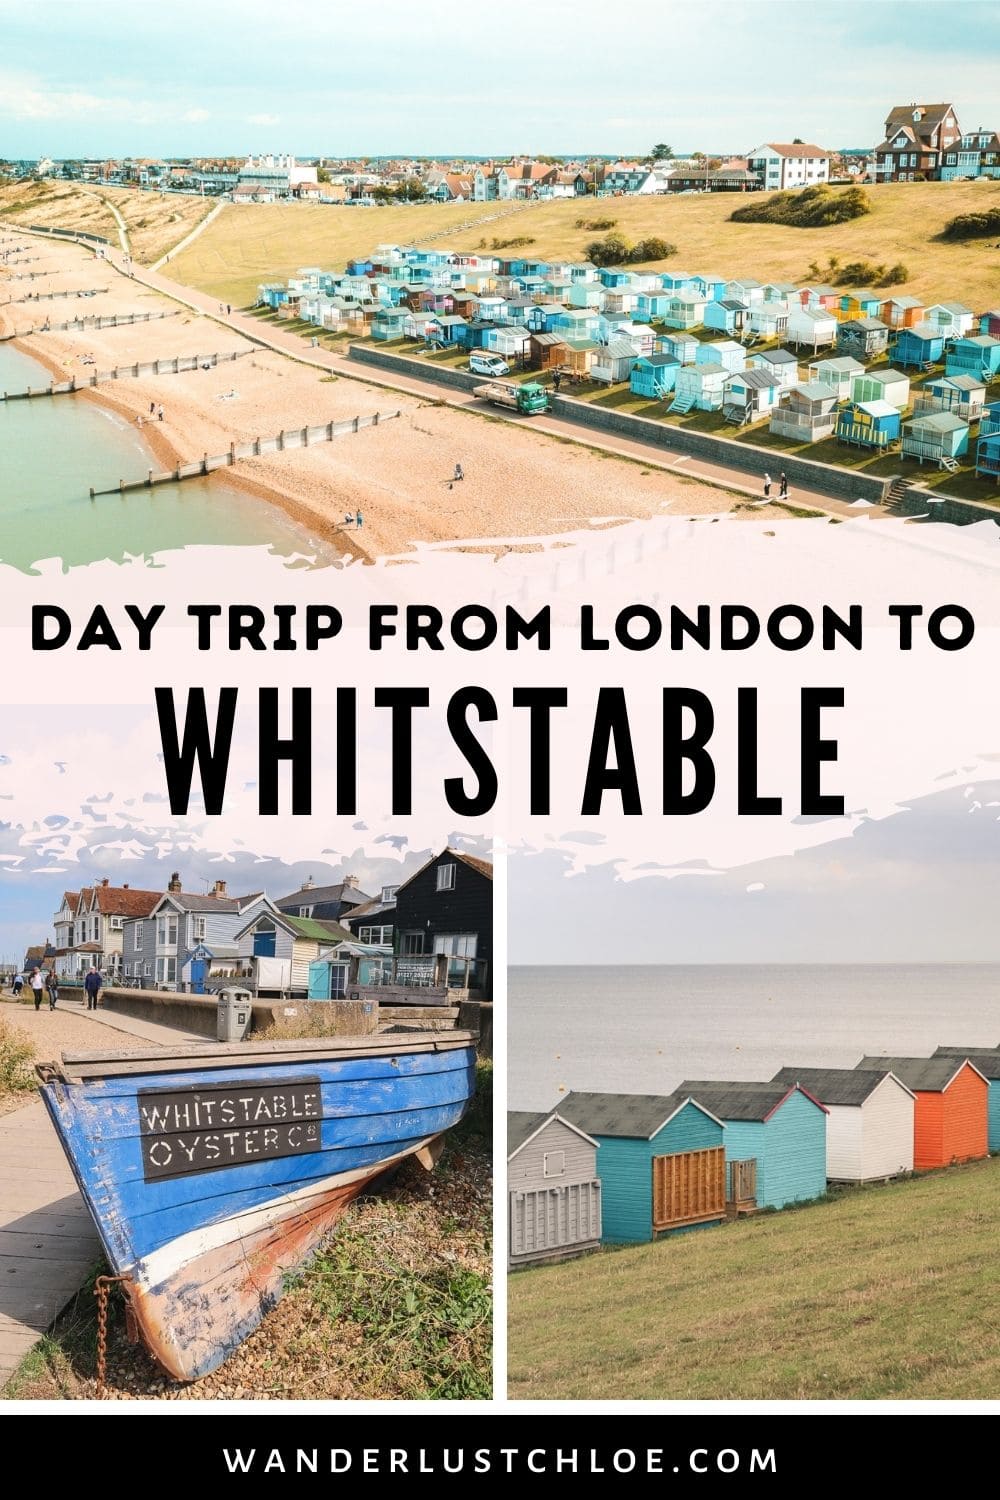 London to Whitstable day trip